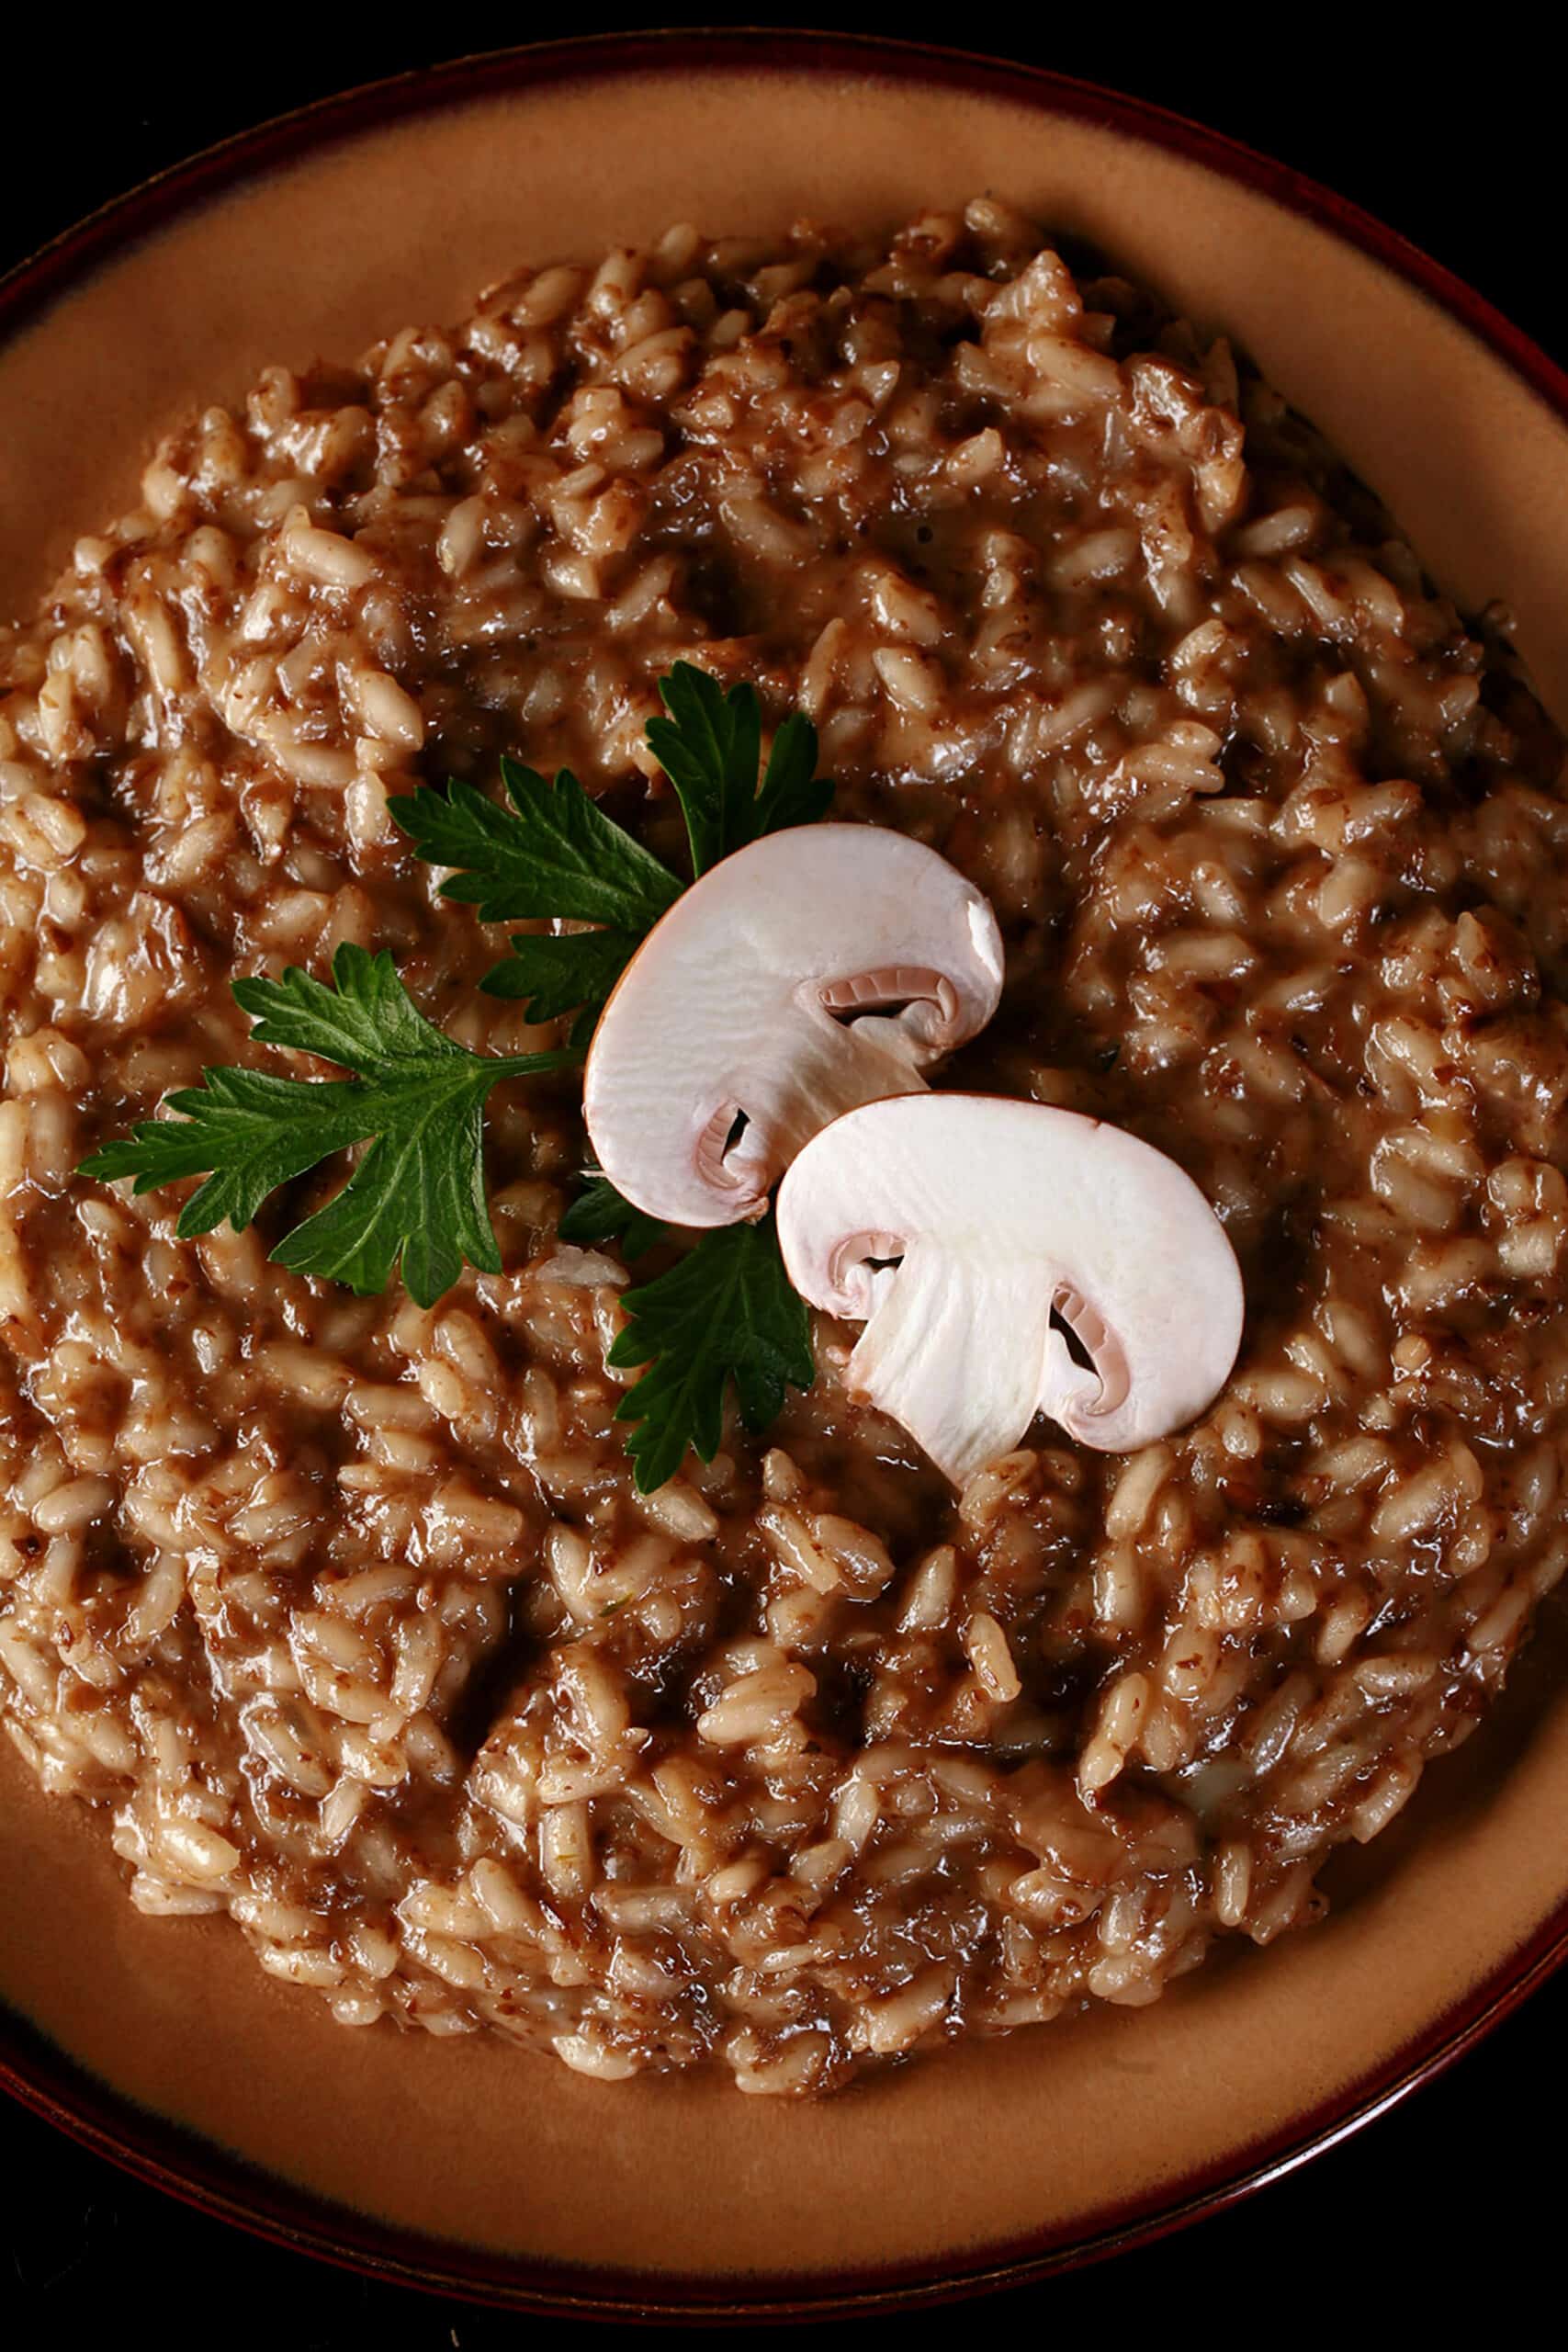 A plate of mushroom risotto, garnished with parsley leaves and sliced mushrooms.